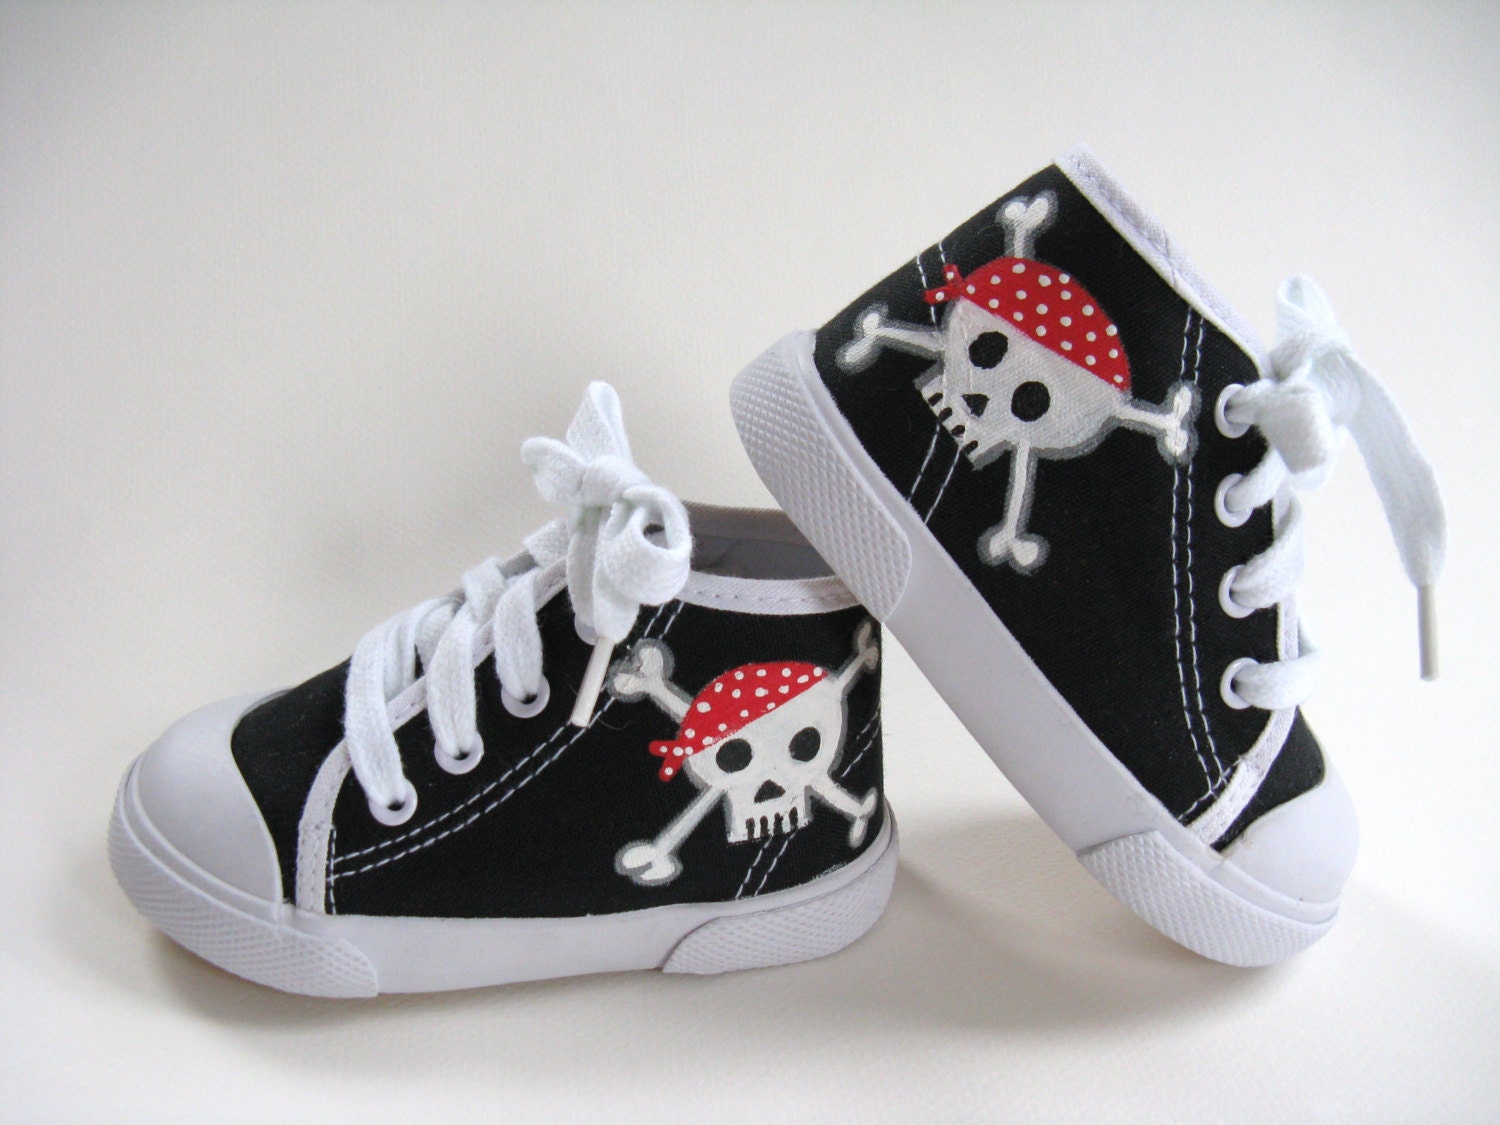 Boys Pirate Shoes, Baby and Toddler, Skull and Crossbones, Hand Painted, Black Hi Top Sneakers - boygirlboygirldesign